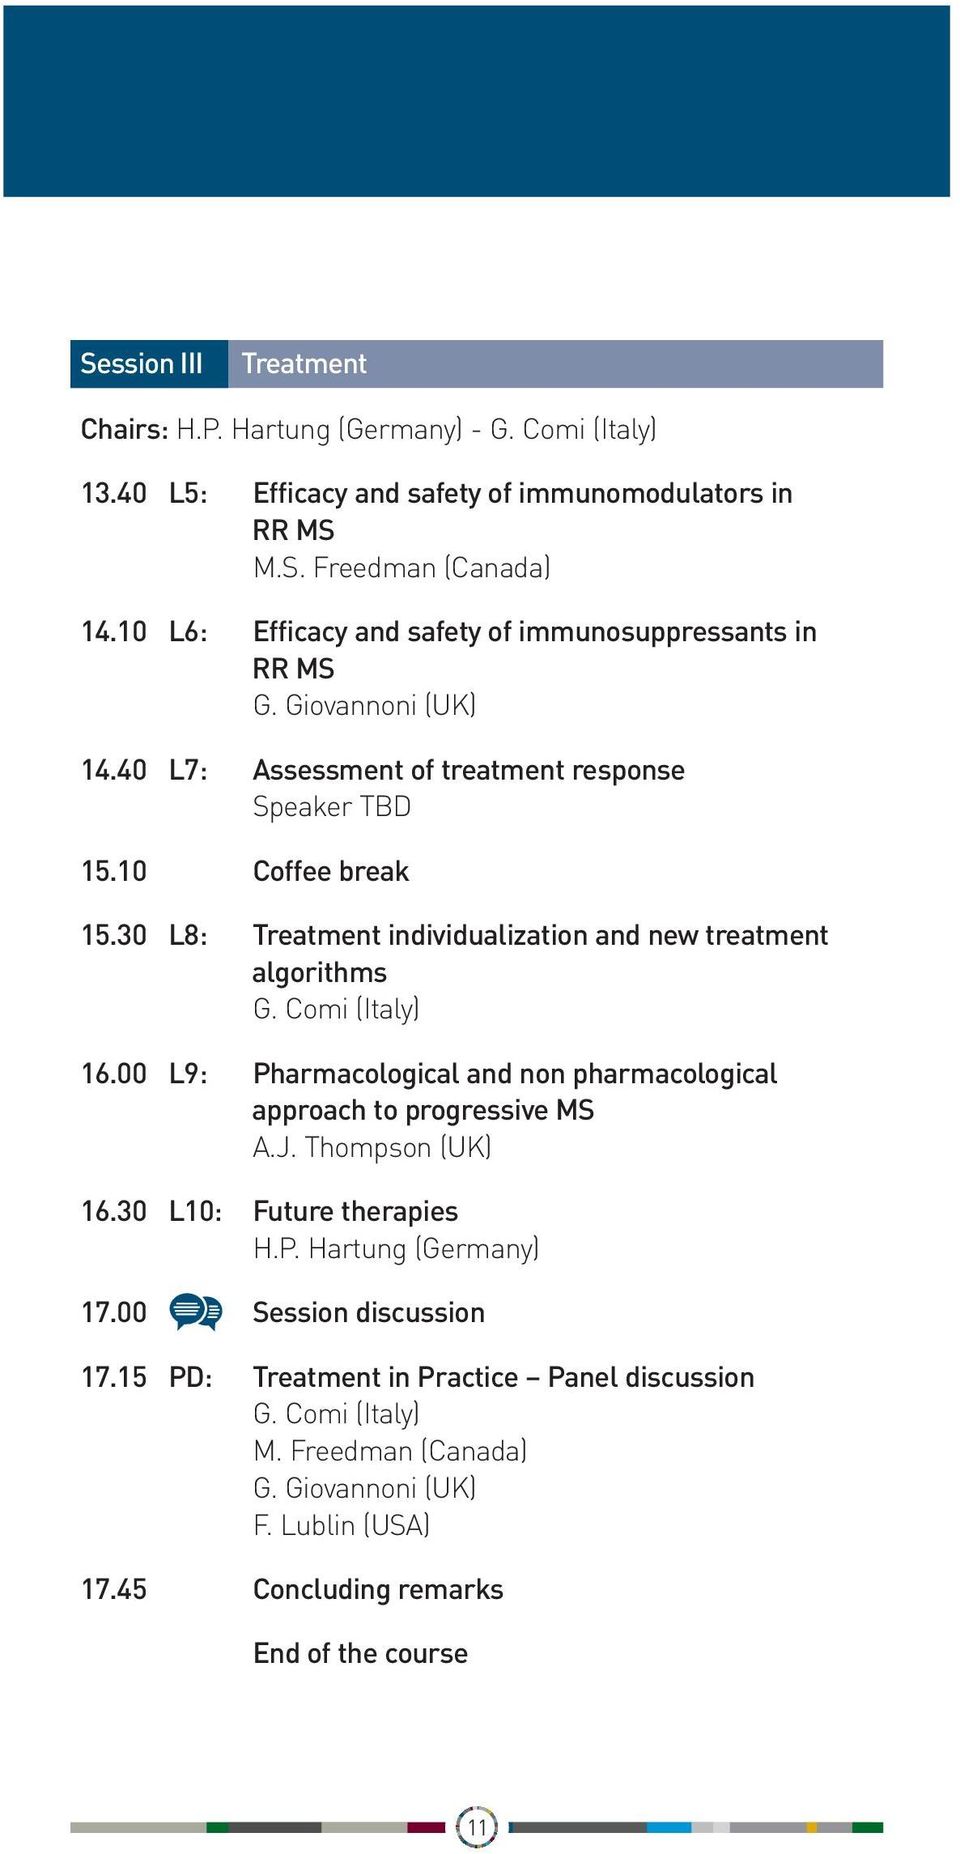 30 L8: Treatment individualization and new treatment algorithms G. Comi (Italy) 16.00 L9: Pharmacological and non pharmacological approach to progressive MS A.J. Thompson (UK) 16.